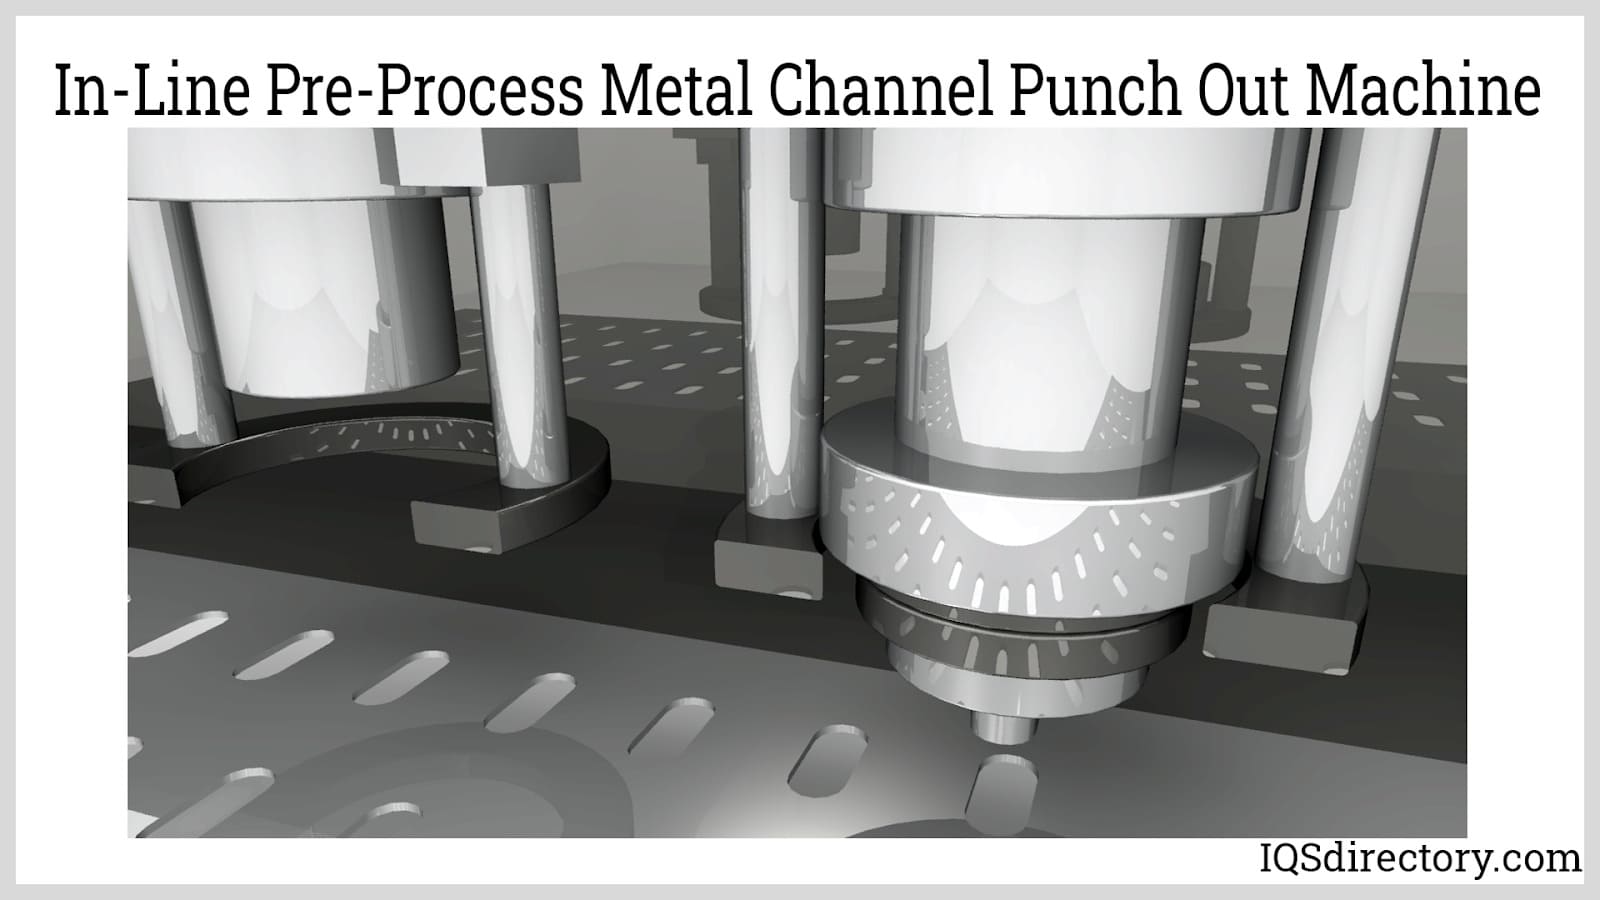 In-Line Pre-Process Metal Channel Punch Out Machine